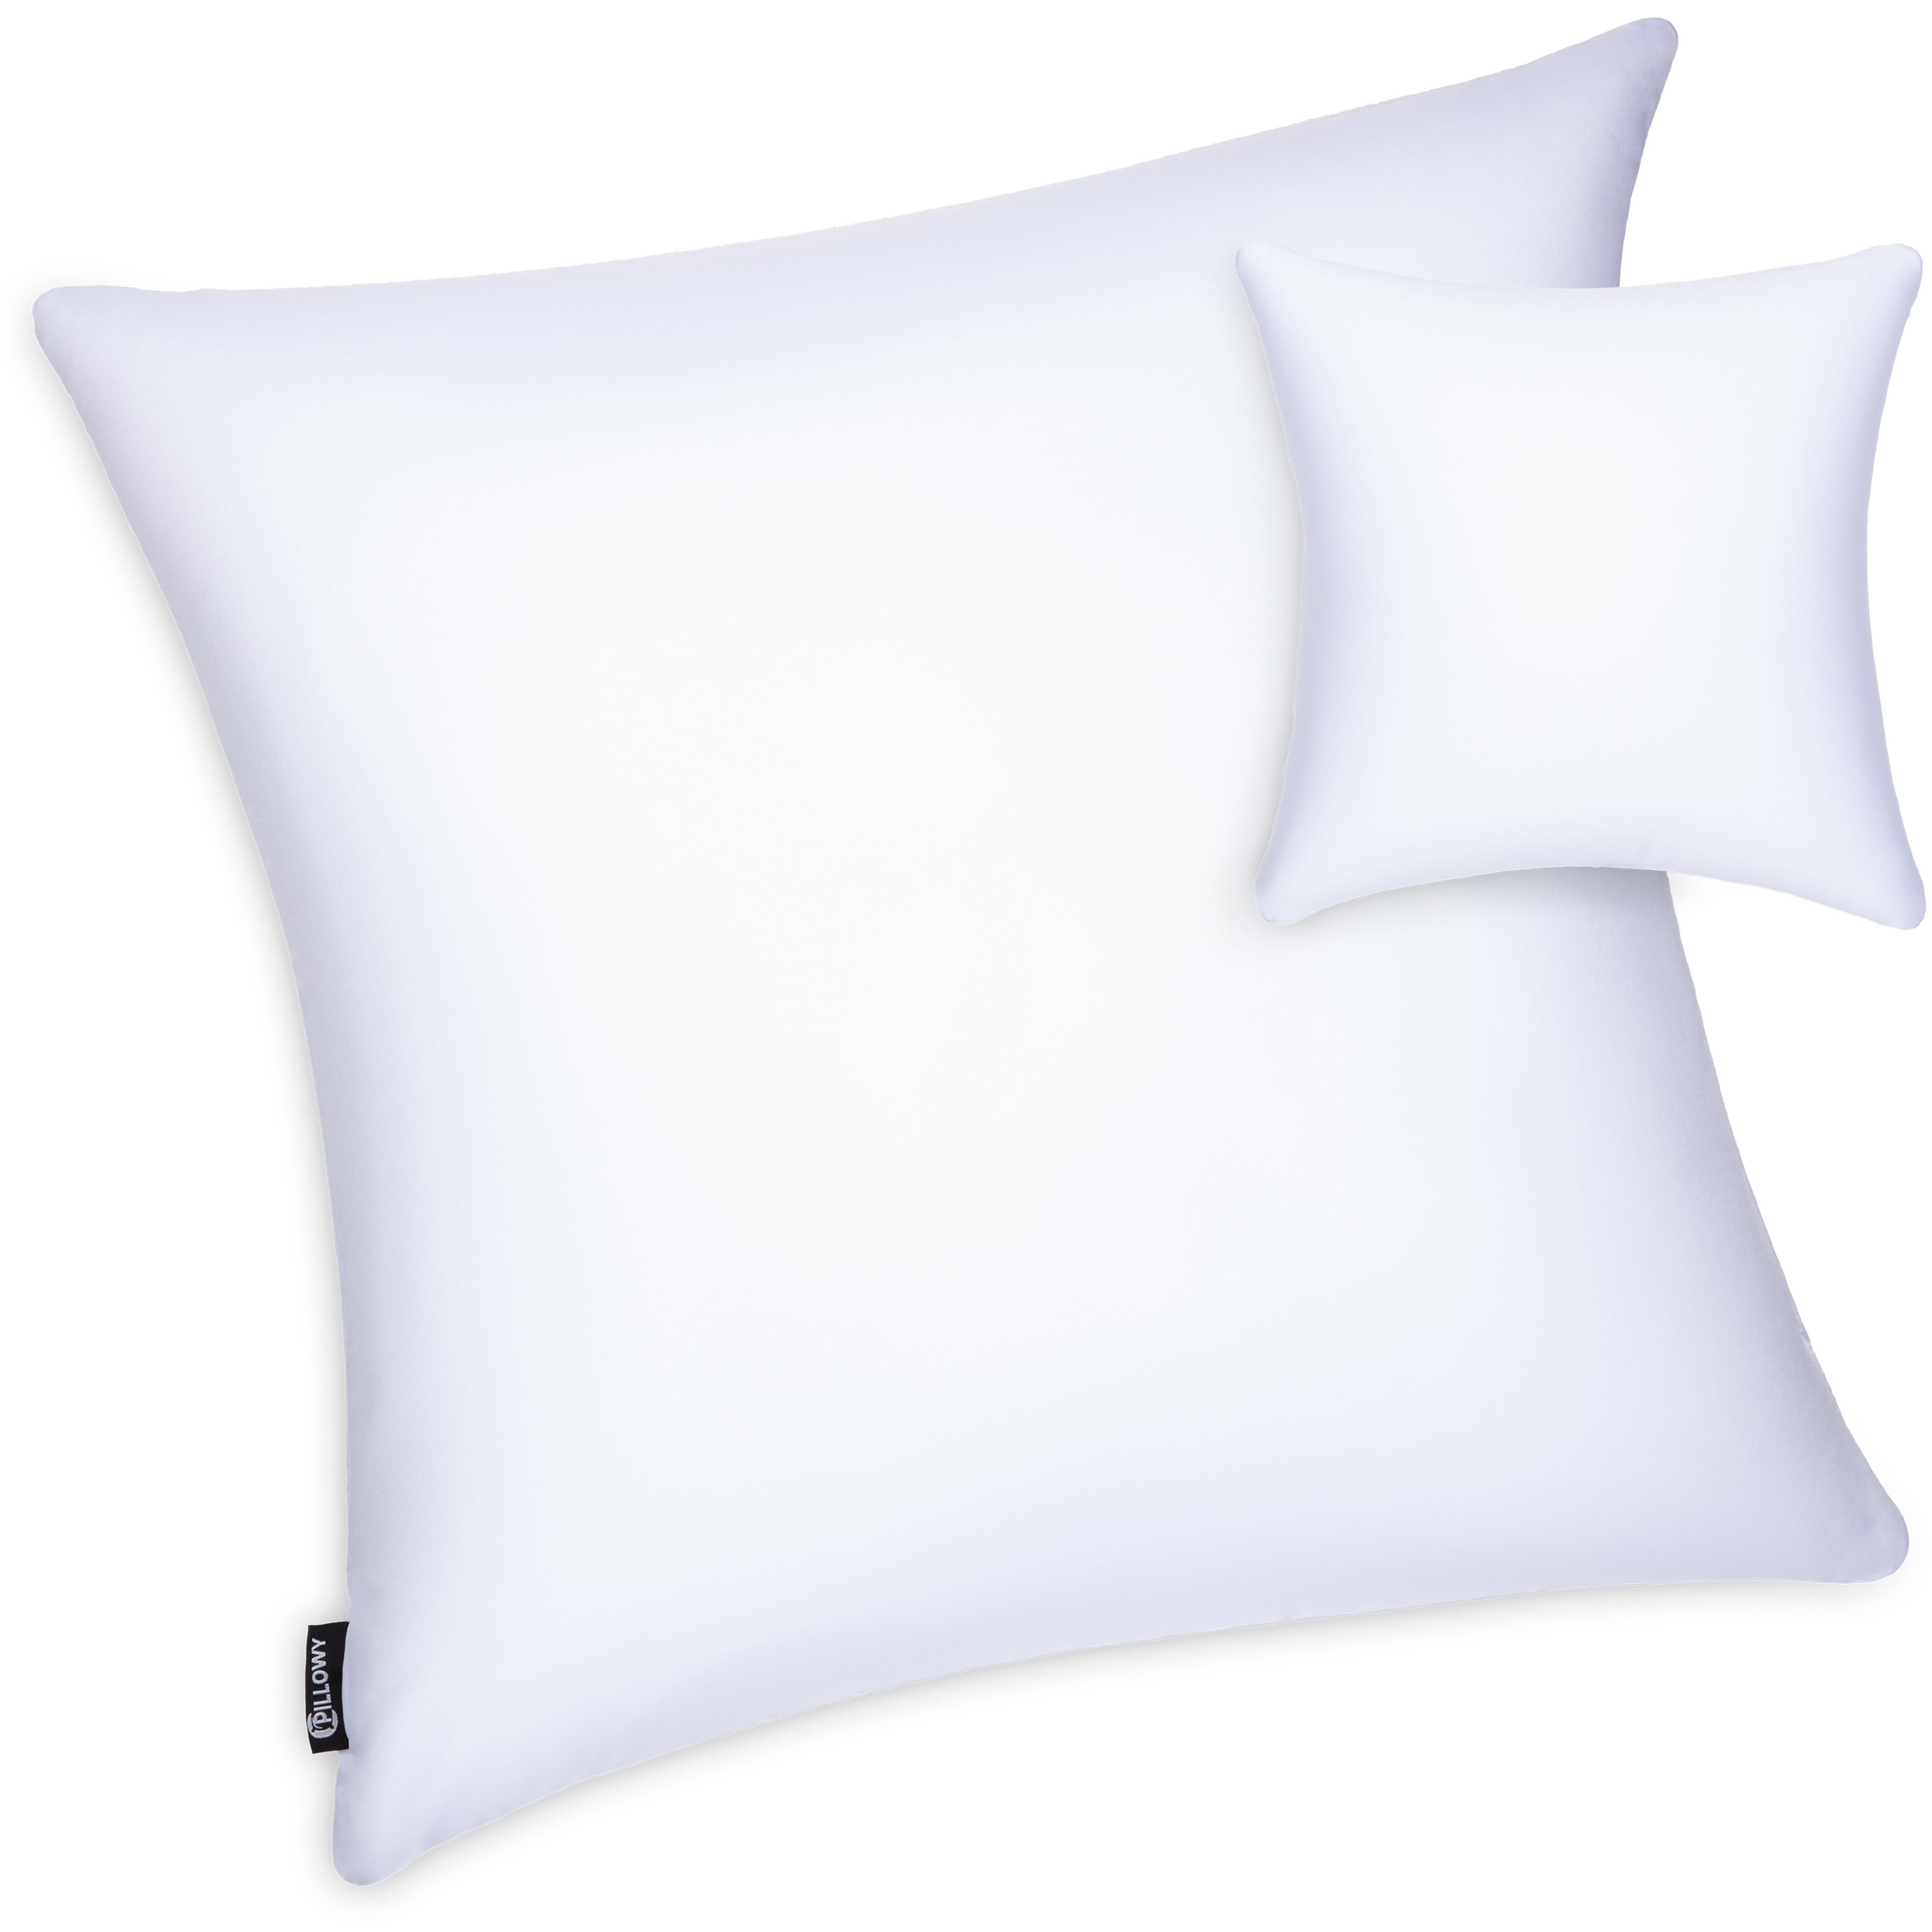 https://ak1.ostkcdn.com/images/products/is/images/direct/7ff1f3daf2b23e6f722780ce545ce718a7b9c34c/Microbead-Stuffer-Pillow-Insert-Sham-Square-Pillow-Cushion-for-Extra-Comfort-%26-Support---Adjustable-%26-Perfect-Fit---1-Pcs.jpg